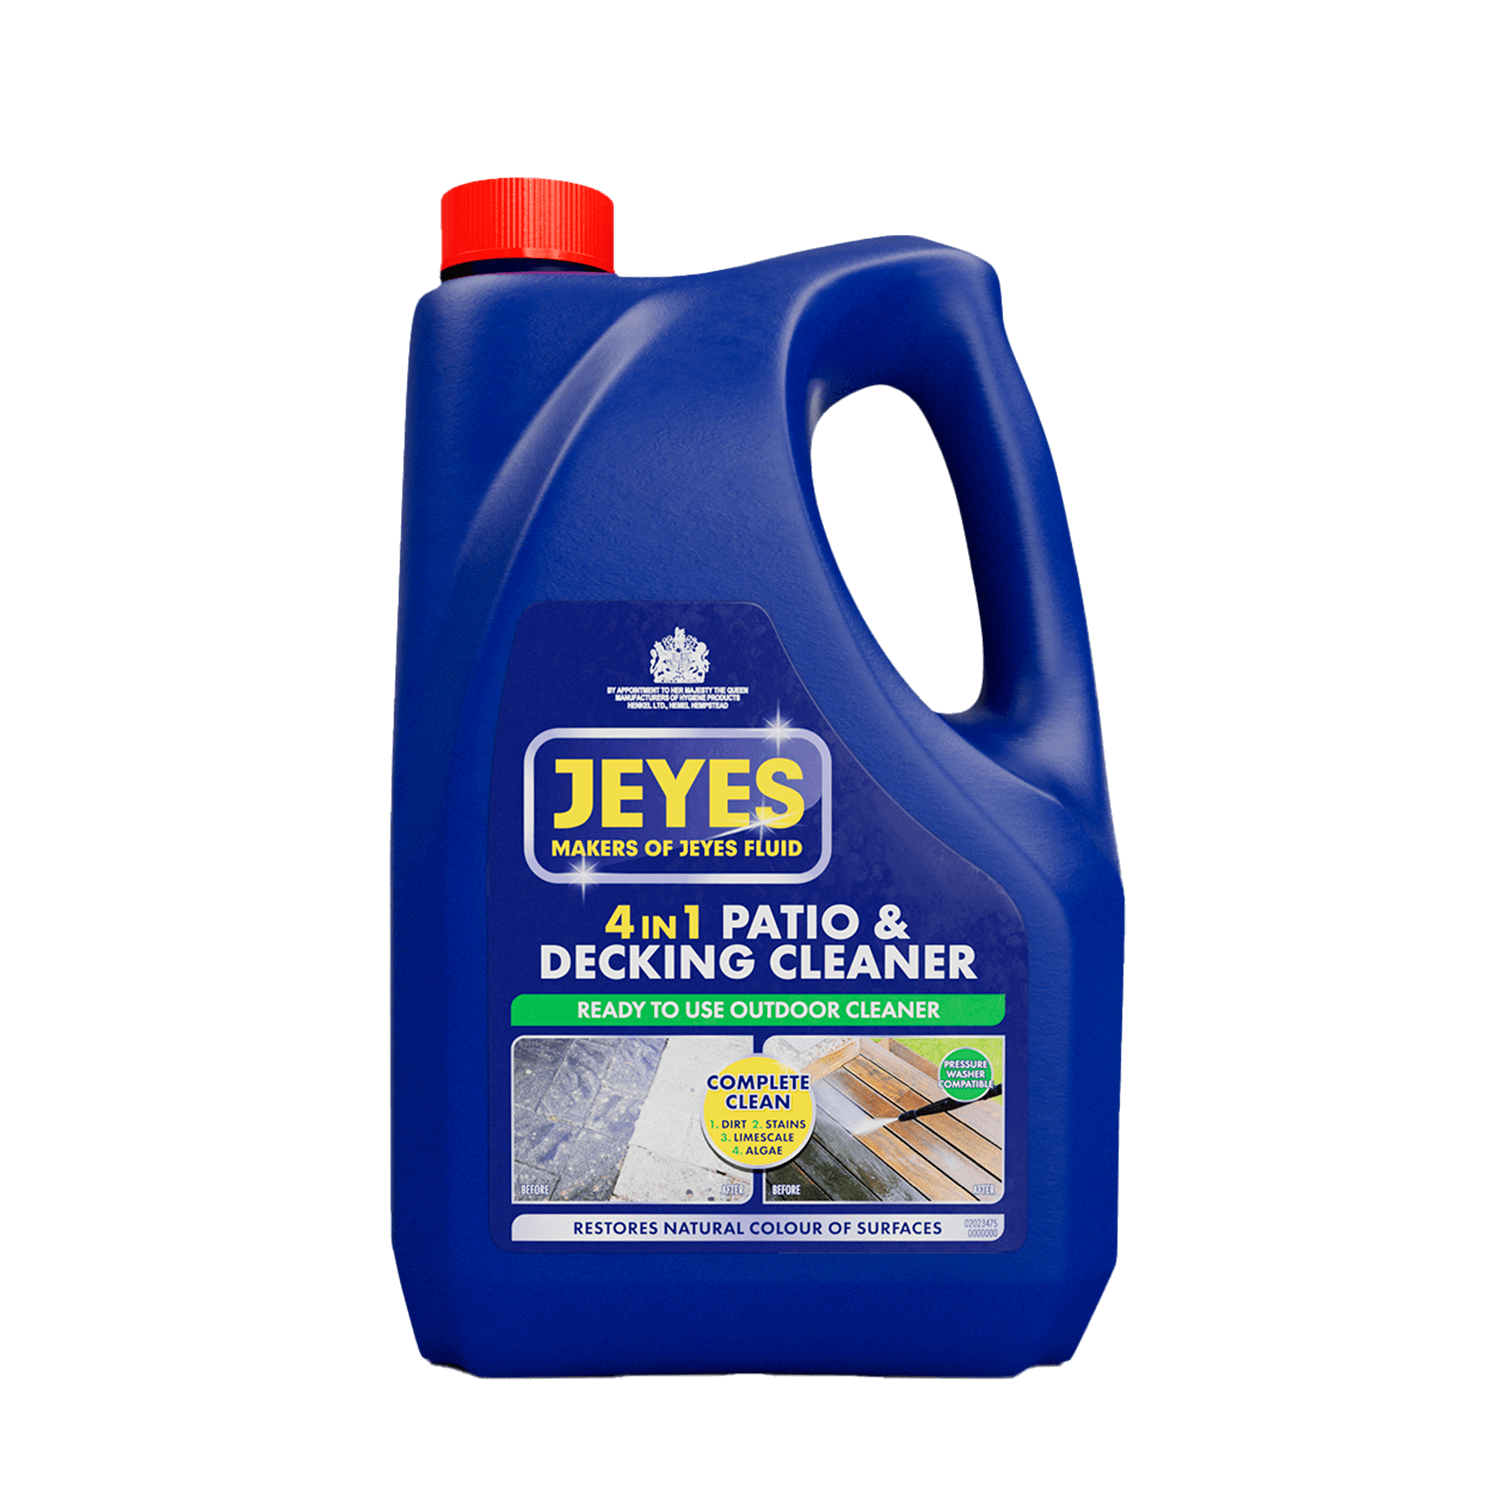 Jeyes Patio & Decking Cleaner